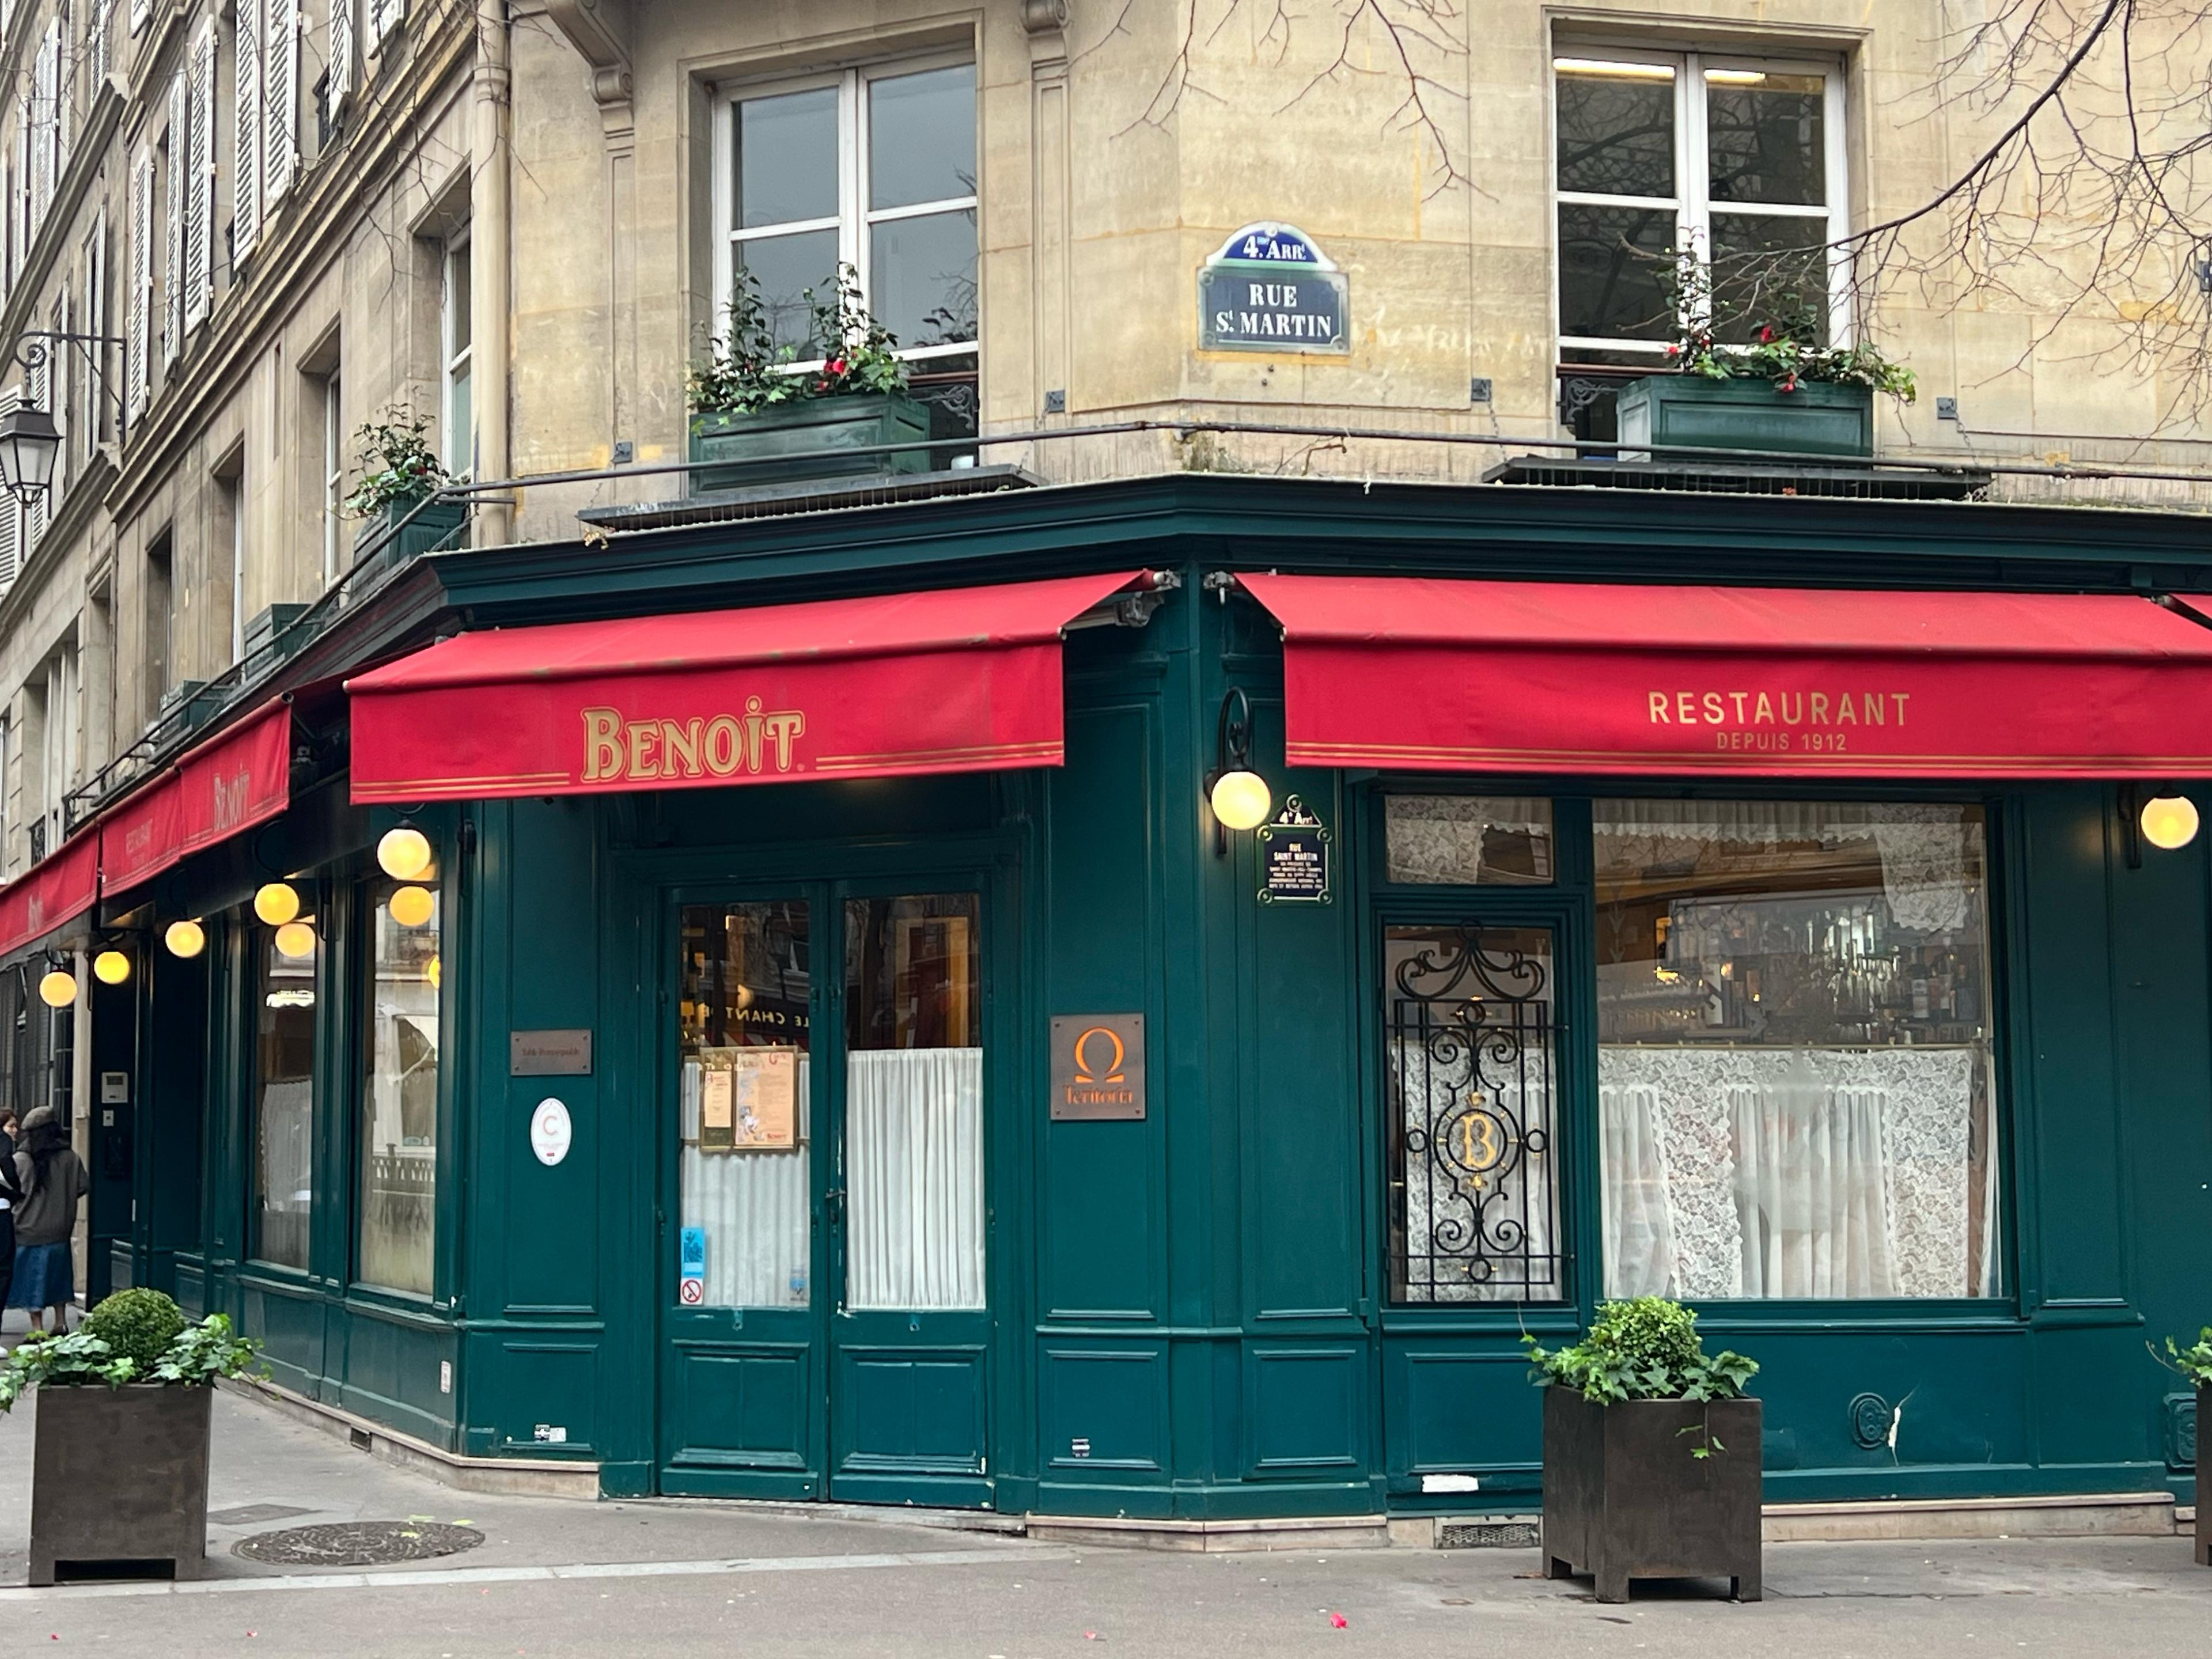 Parisian restaurant exterior with green paint and red awnings